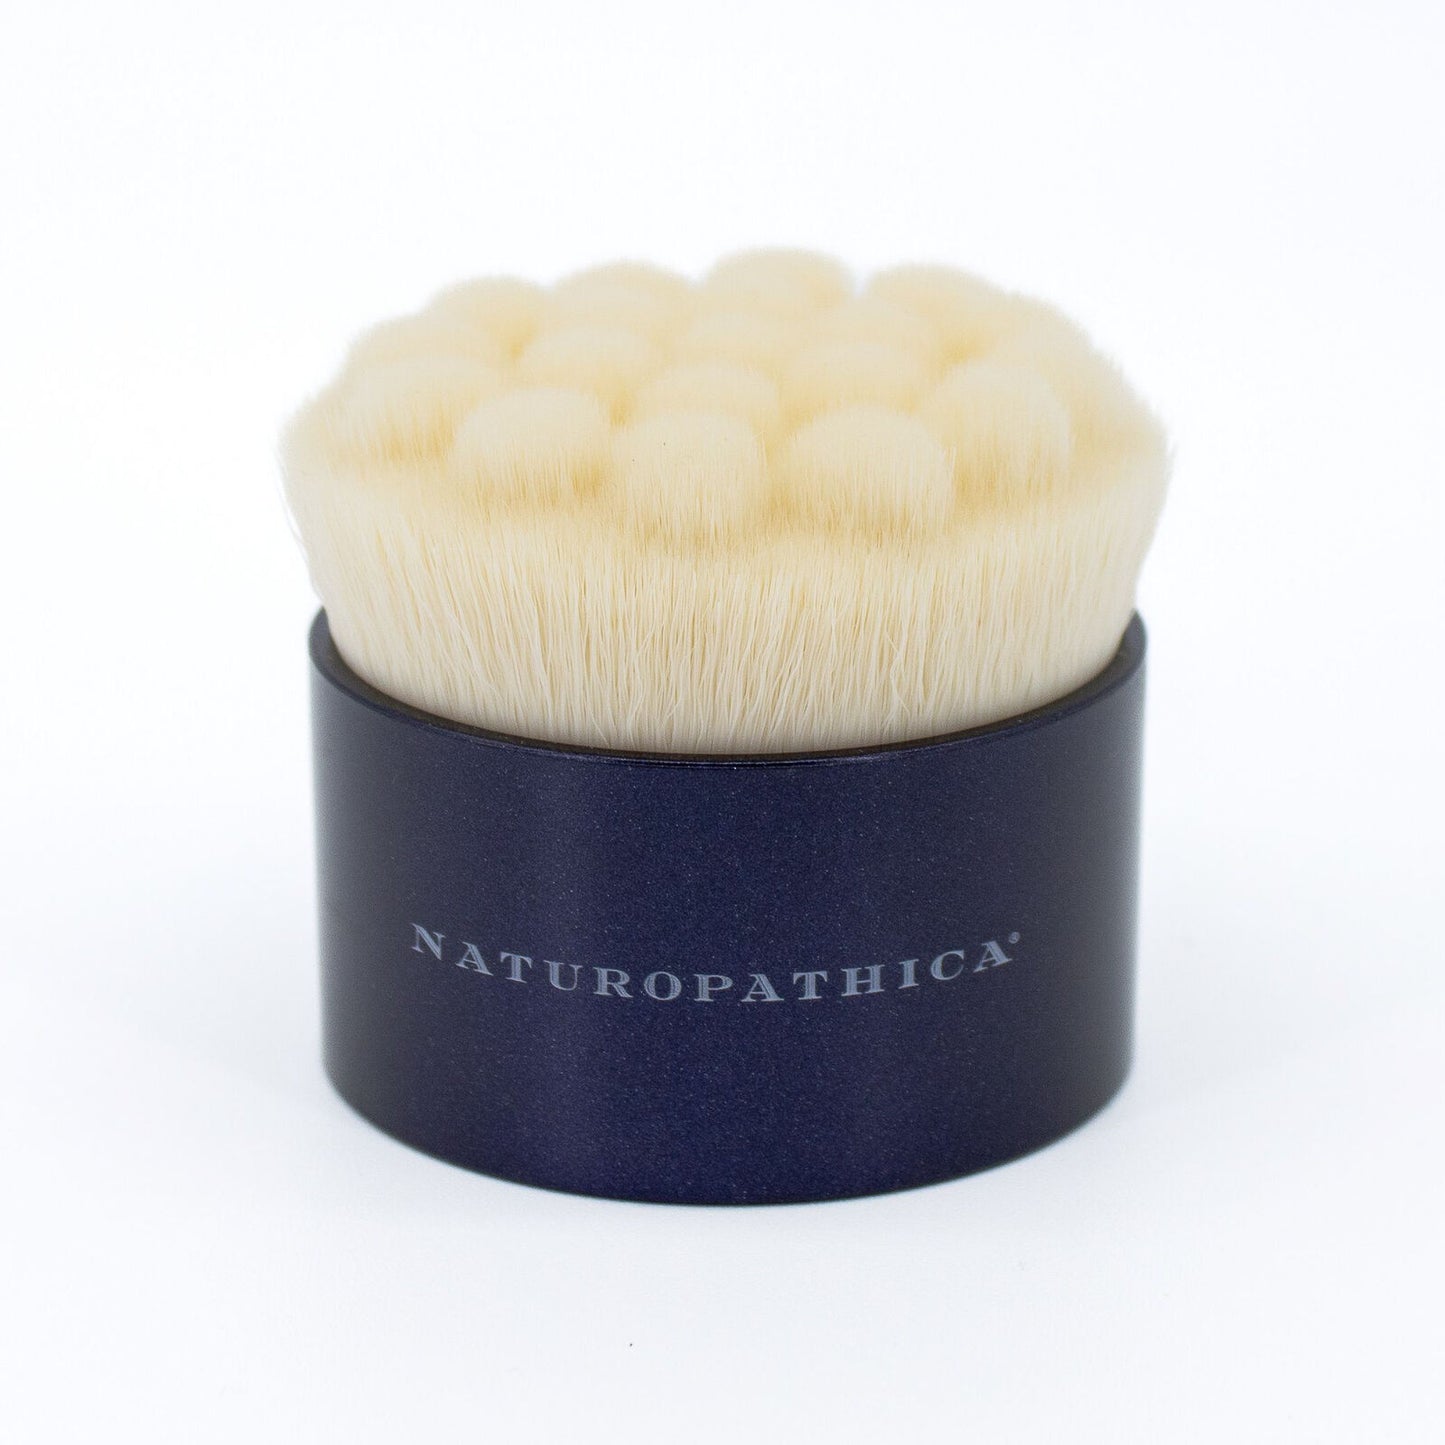 NATUROPATHICA Facial Cleansing Brush - Imperfect Box